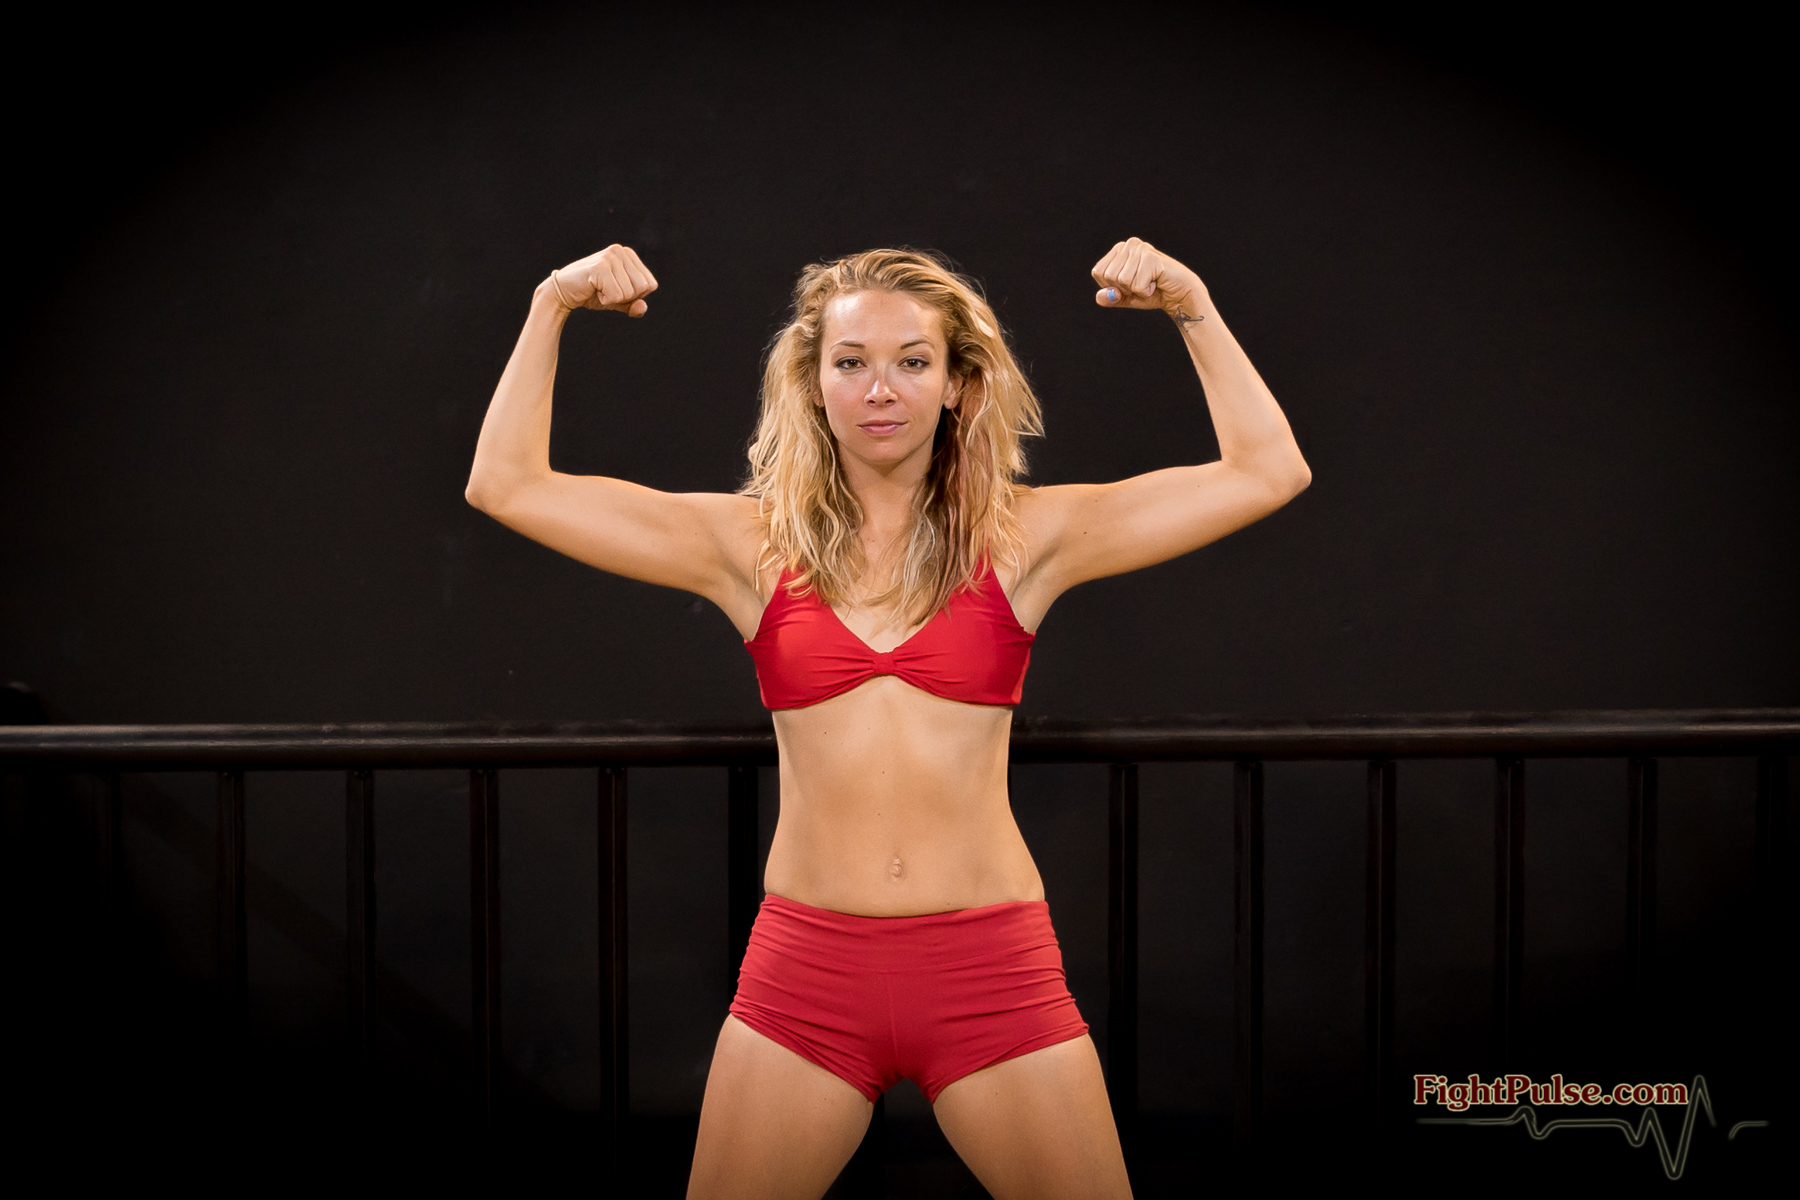 Fight Pulse profile, stats and photos of American session wrestler, Ashley Wildcat...